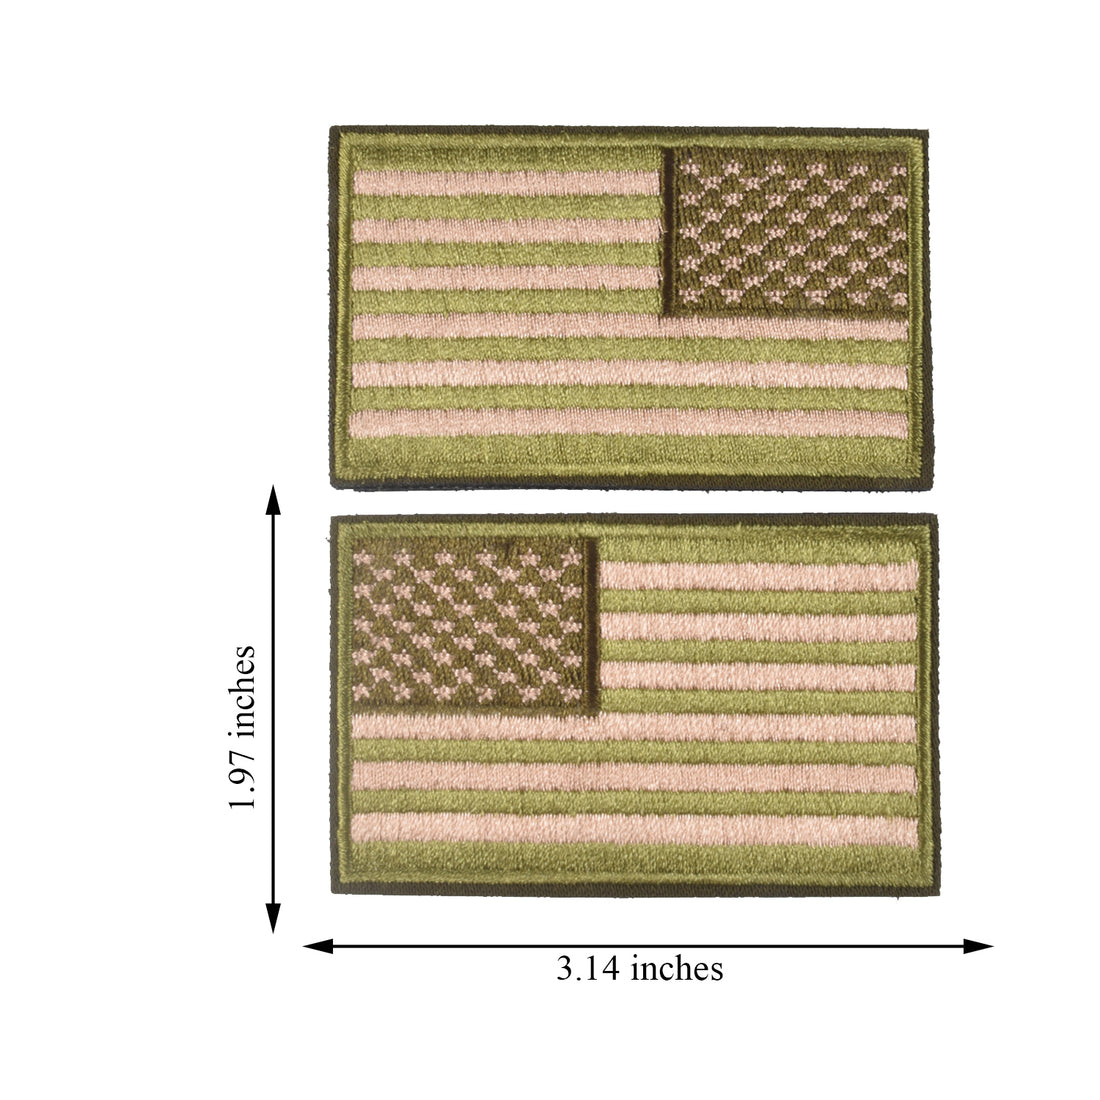 2 Pieces Tactical US American Flag Patch, Military USA United States of America Uniform Emblem Patches, Multitan-Reverse Green